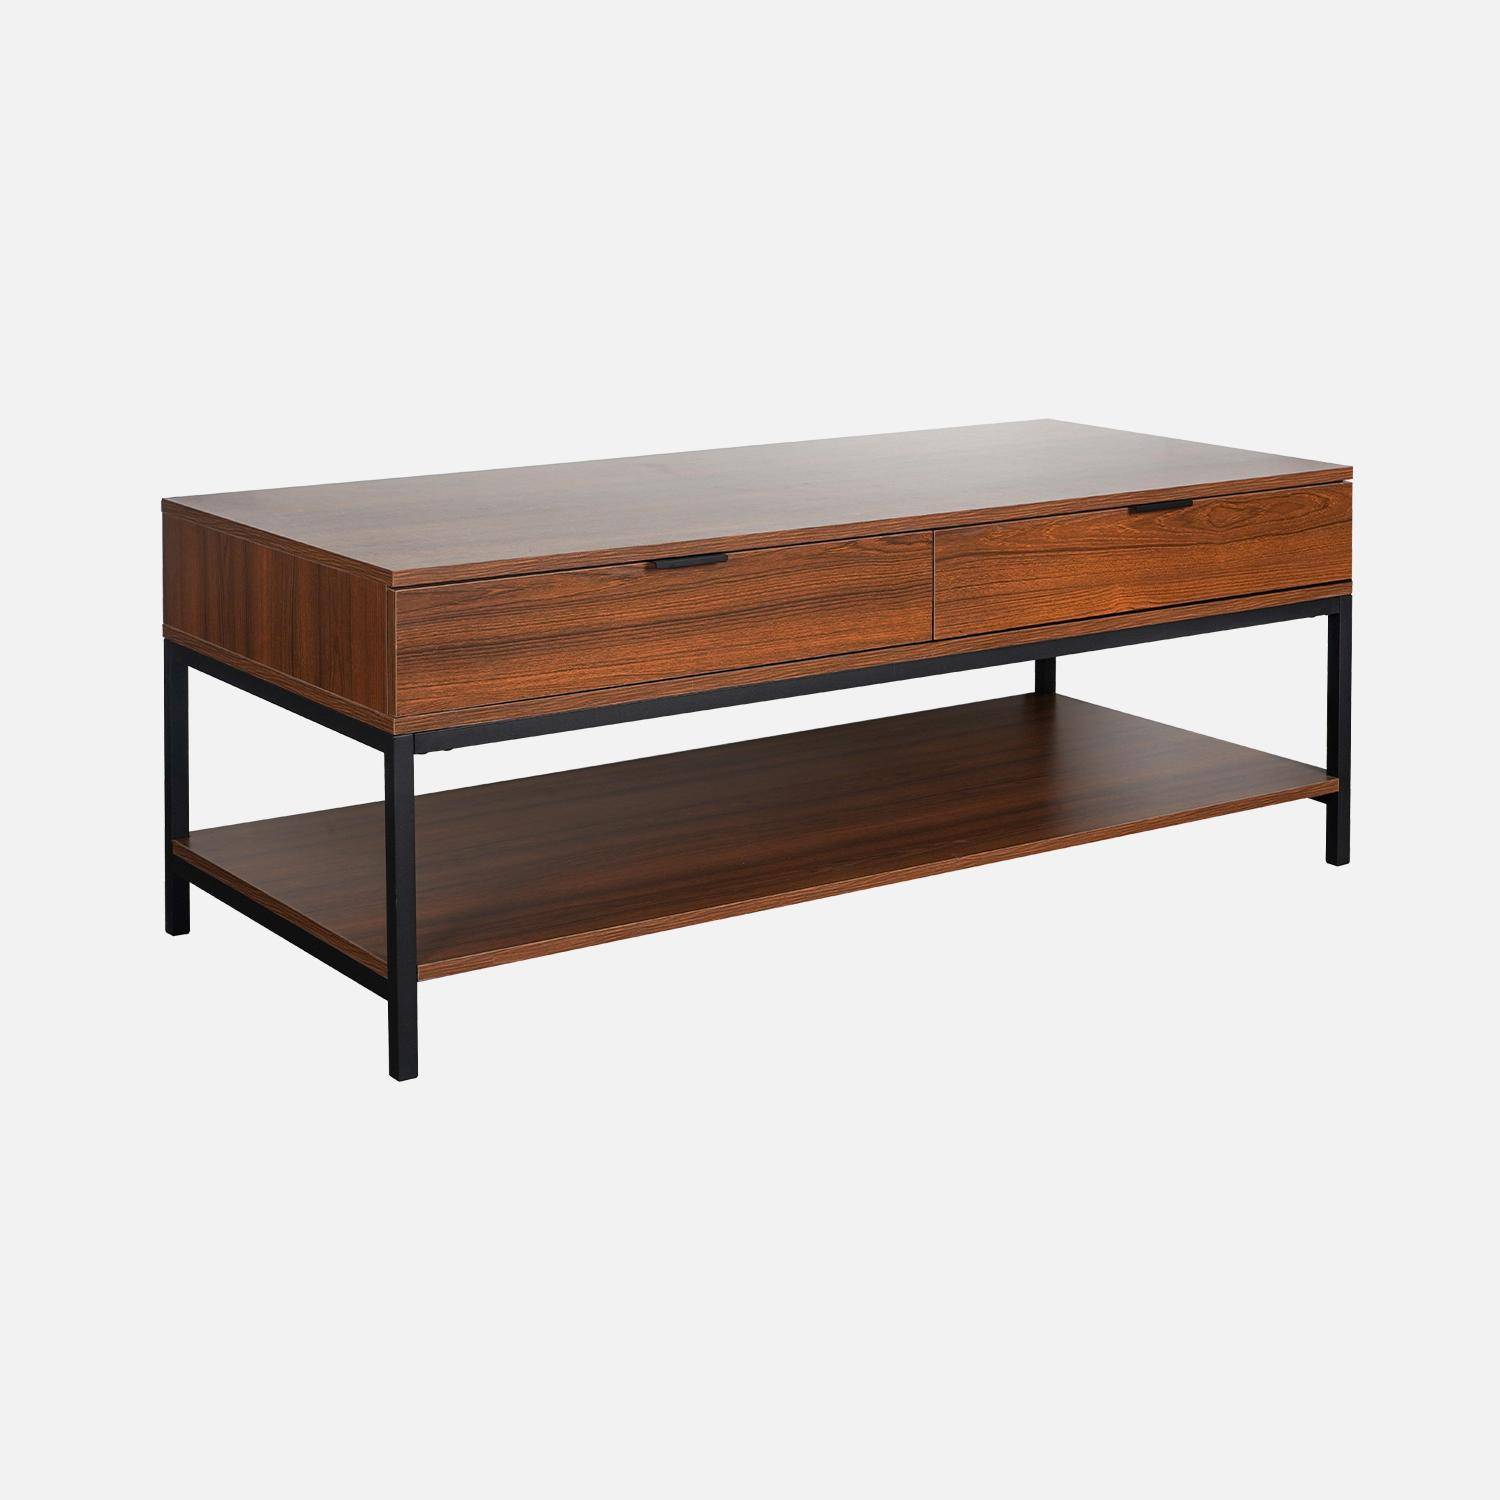 Walnut-coloured coffee table with black metal legs and handle - 2 drawers and 1 shelf,sweeek,Photo4